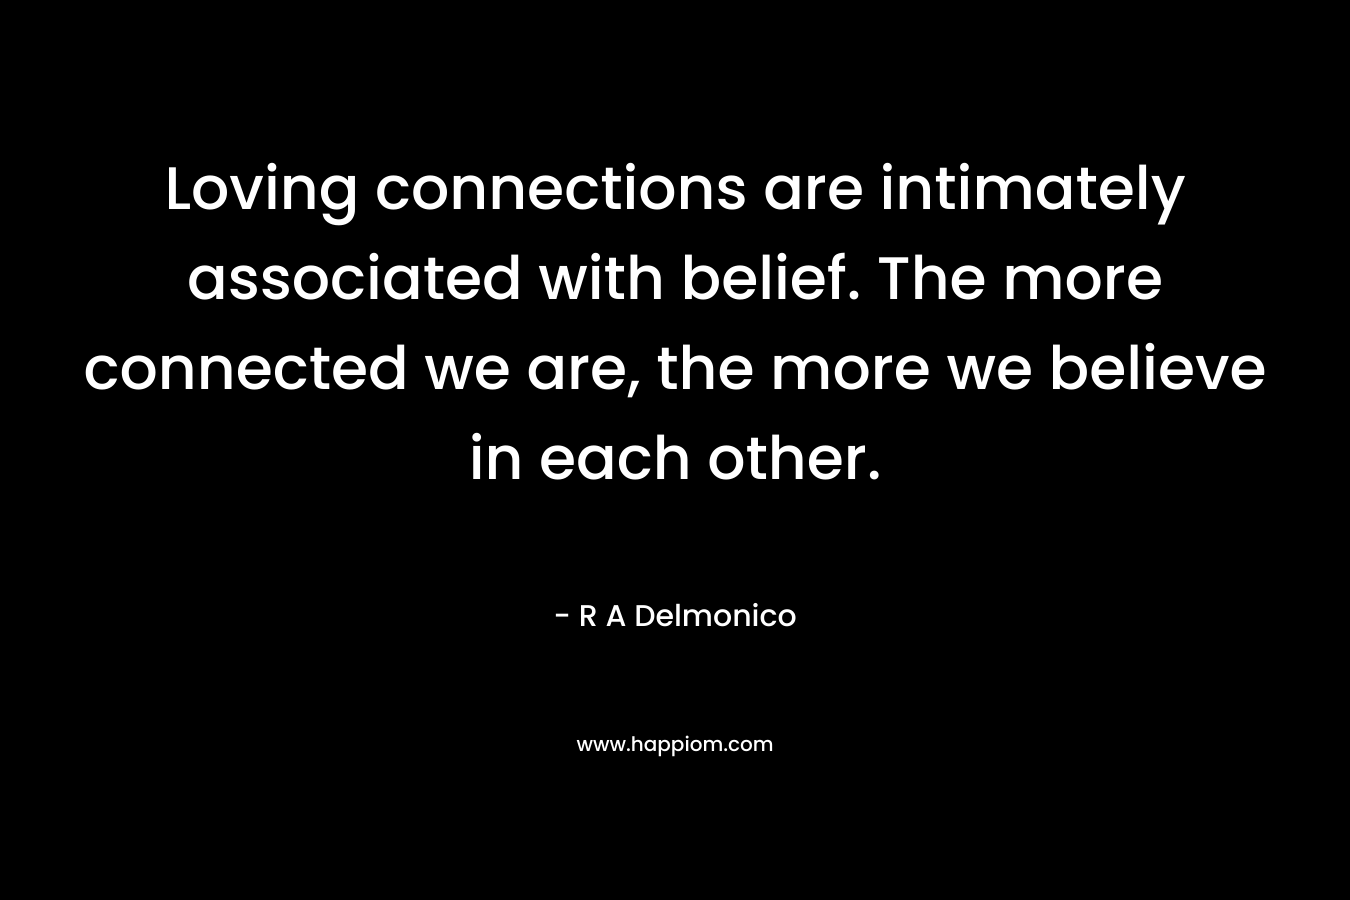 Loving connections are intimately associated with belief. The more connected we are, the more we believe in each other. – R A Delmonico